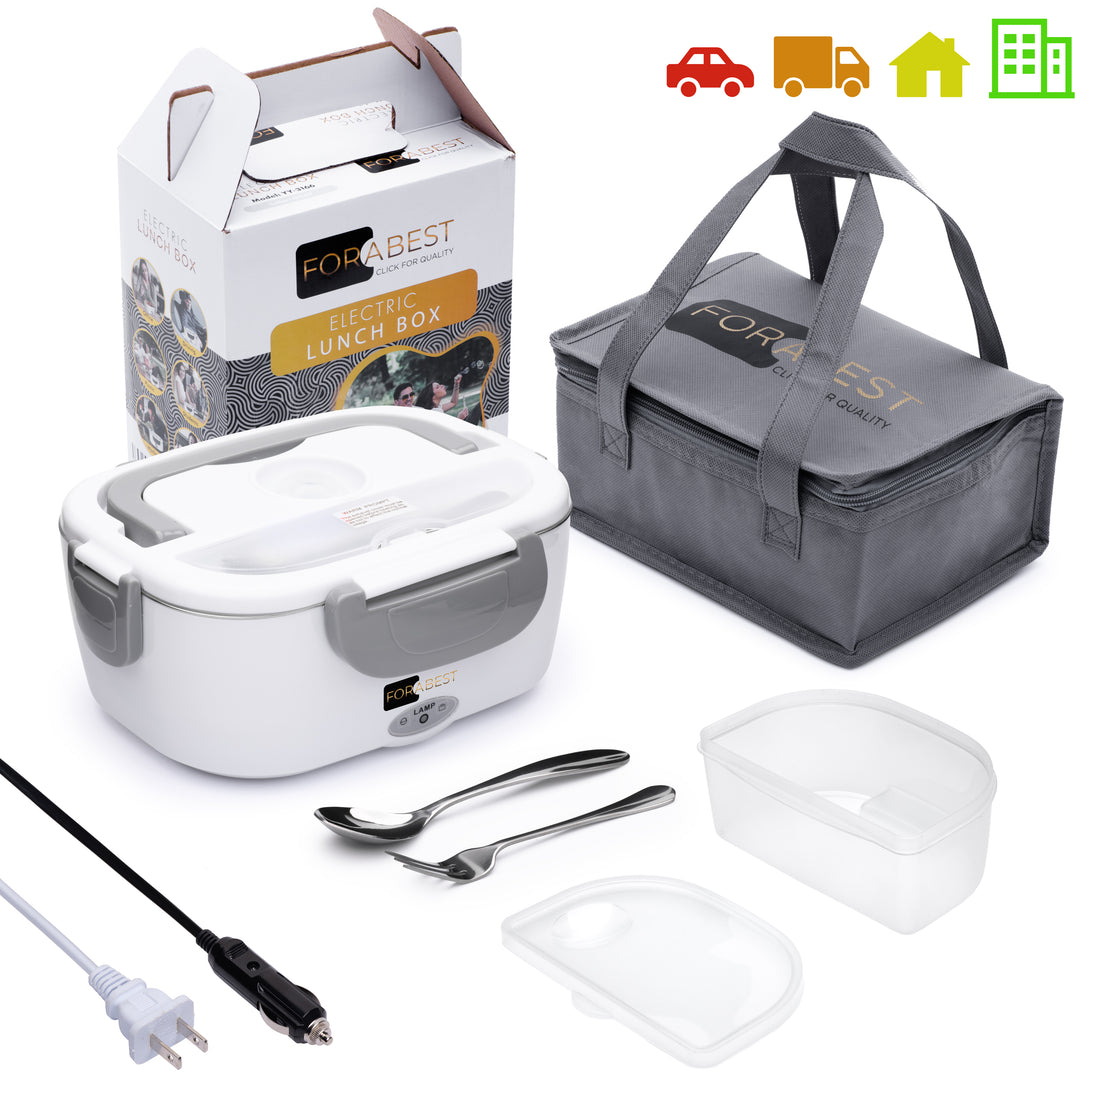 FORABEST Electric lunch box